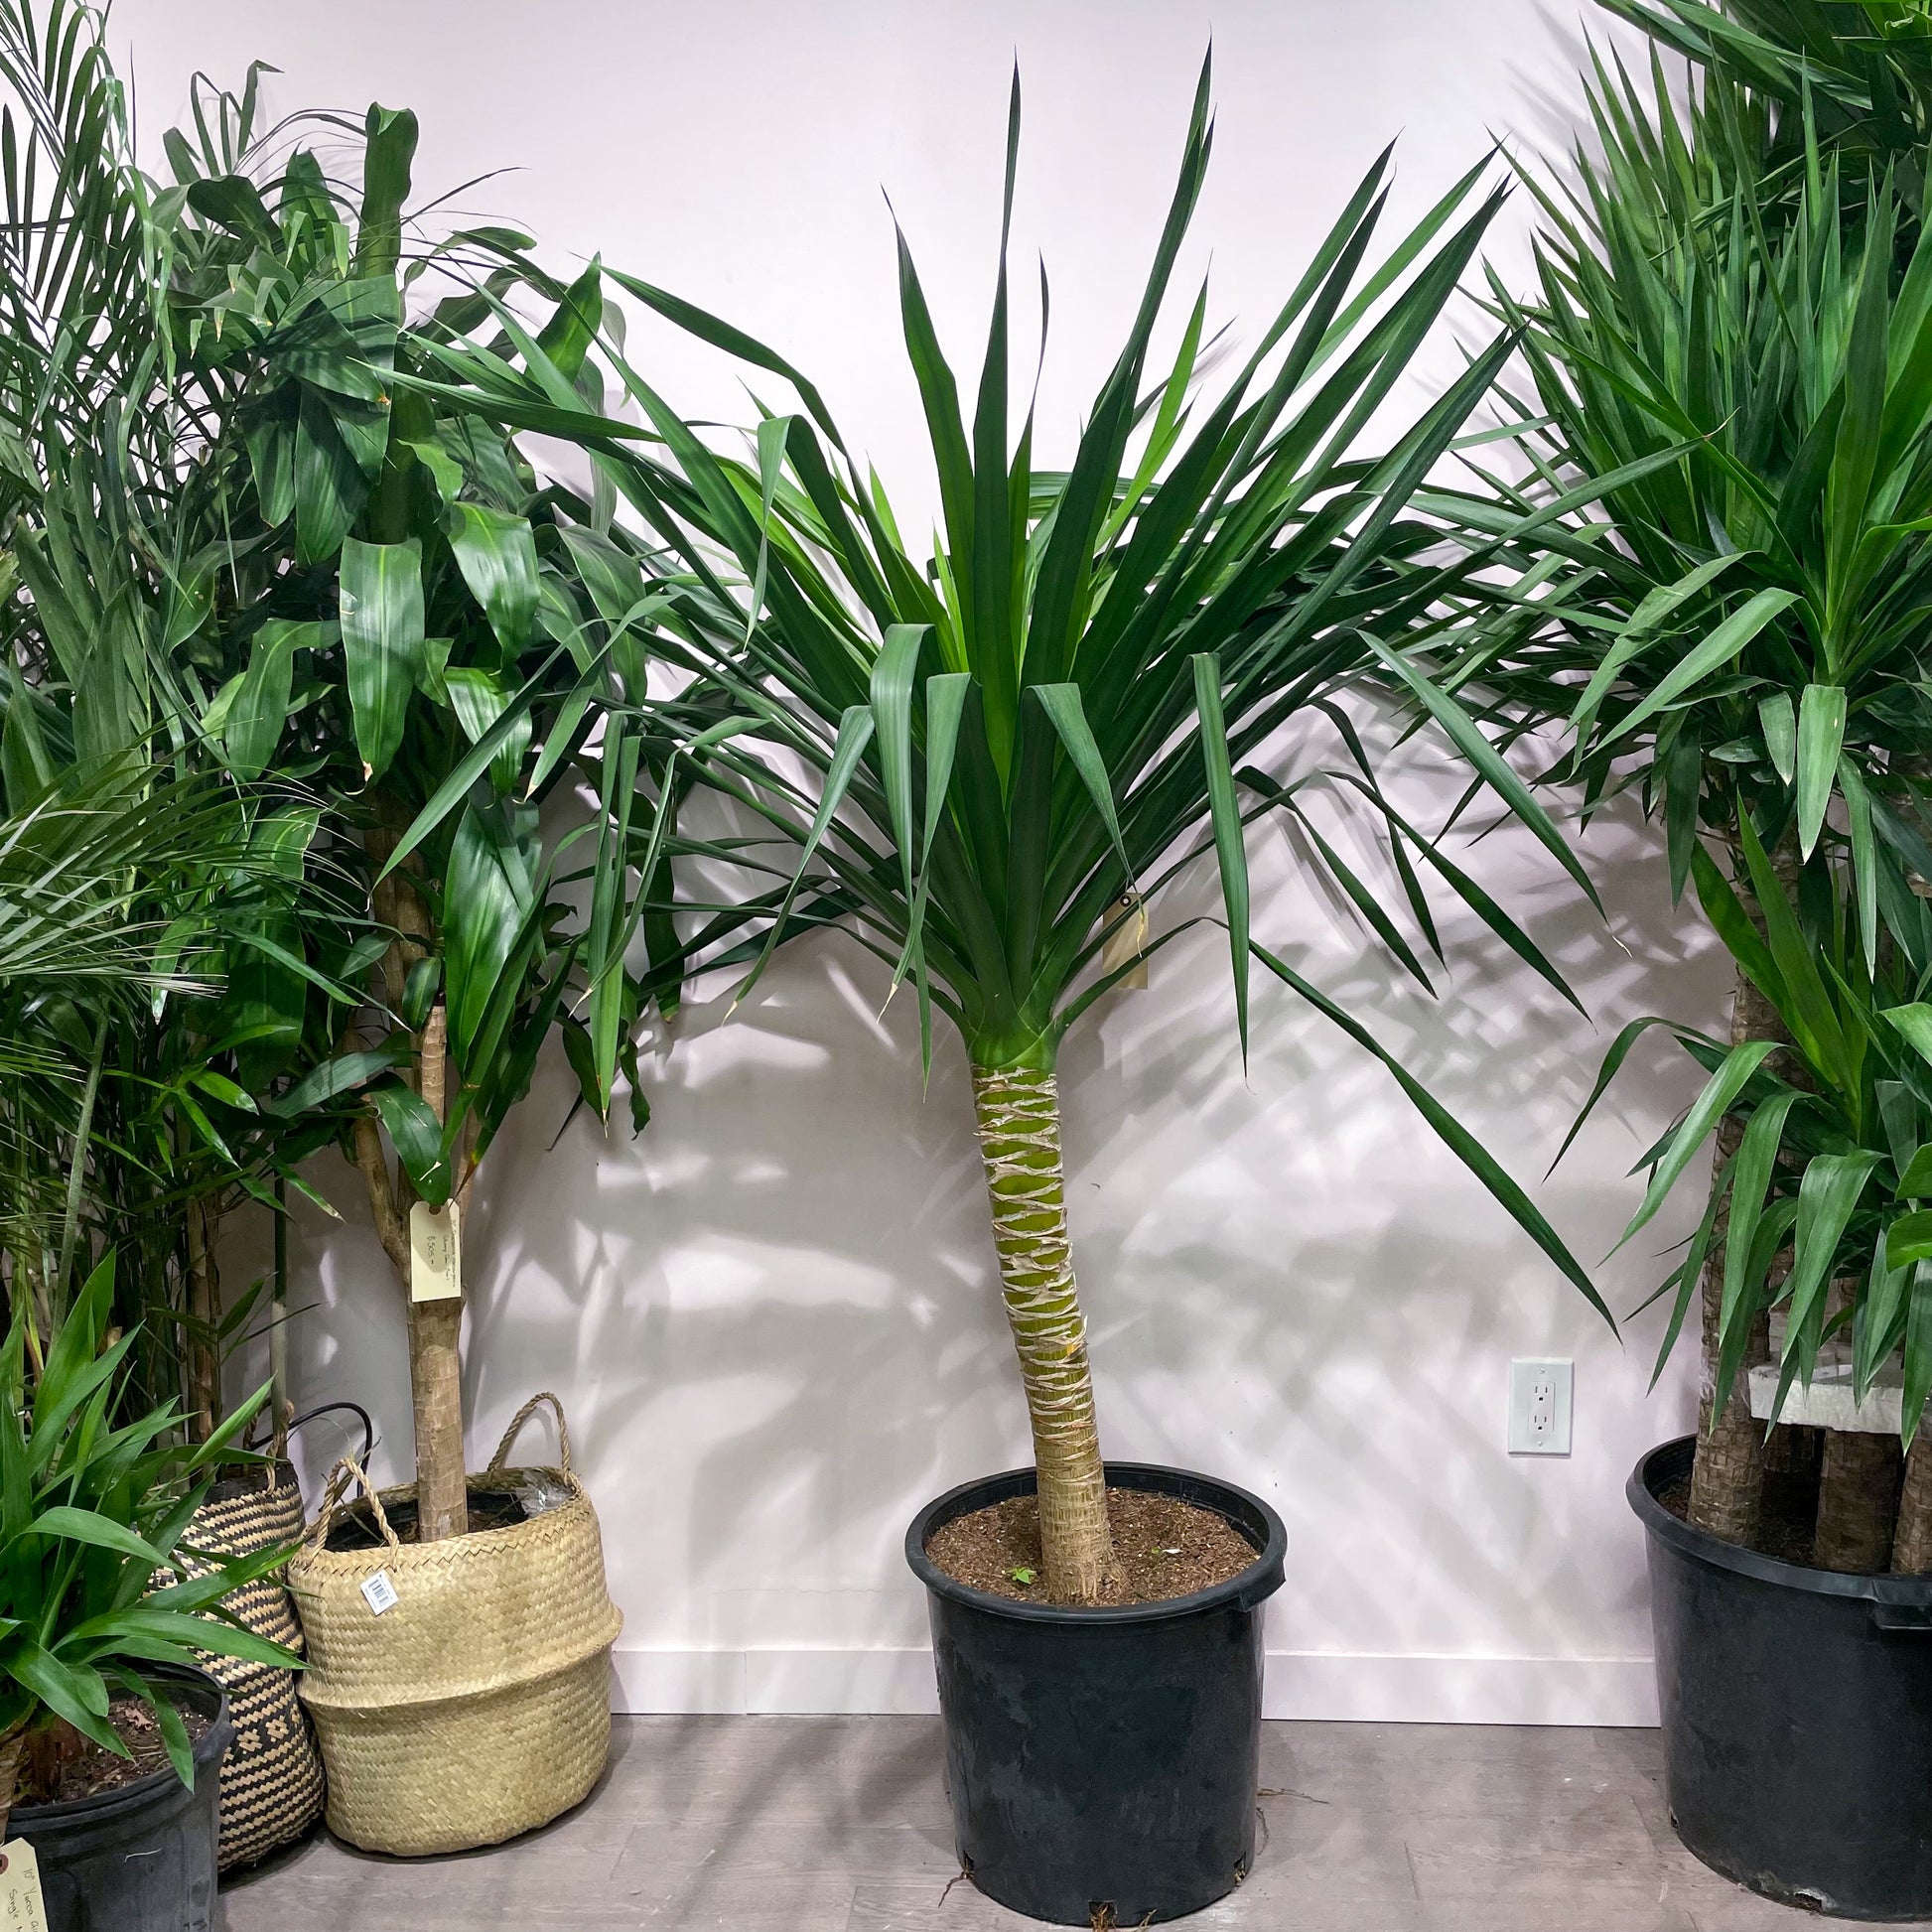 Aboera, Dracaena (Dracaena arborea) in a 14 inch pot. Indoor plant for sale by Promise Supply for delivery and pickup in Toronto